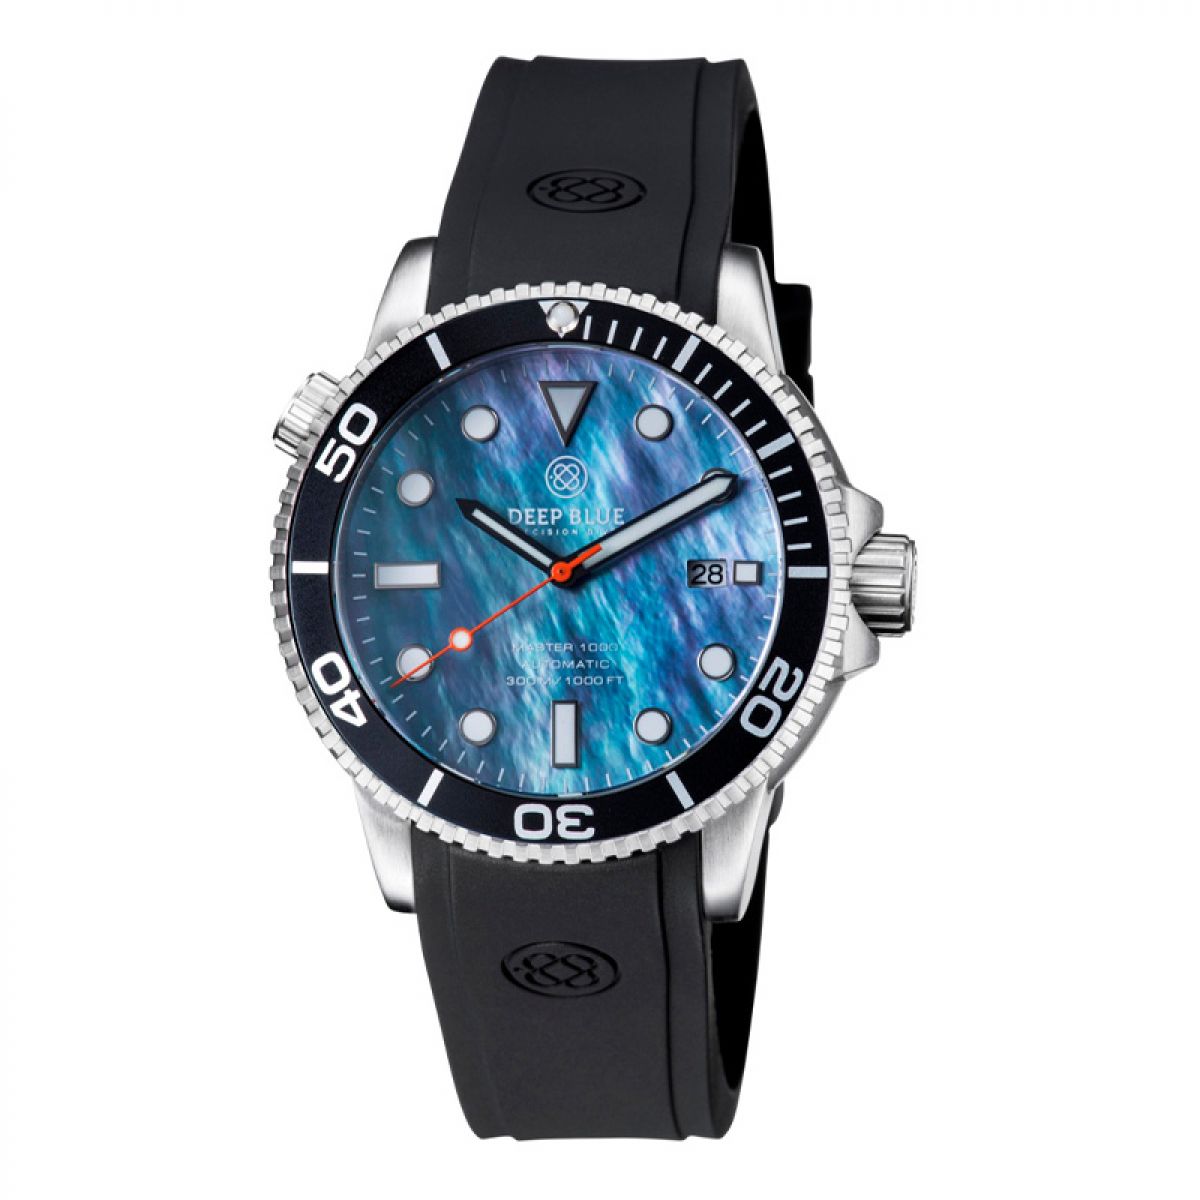 MASTER 1000 AUTOMATIC DIVER BLACK BEZEL -PLATINUM MOTHER OF PEARL DIAL